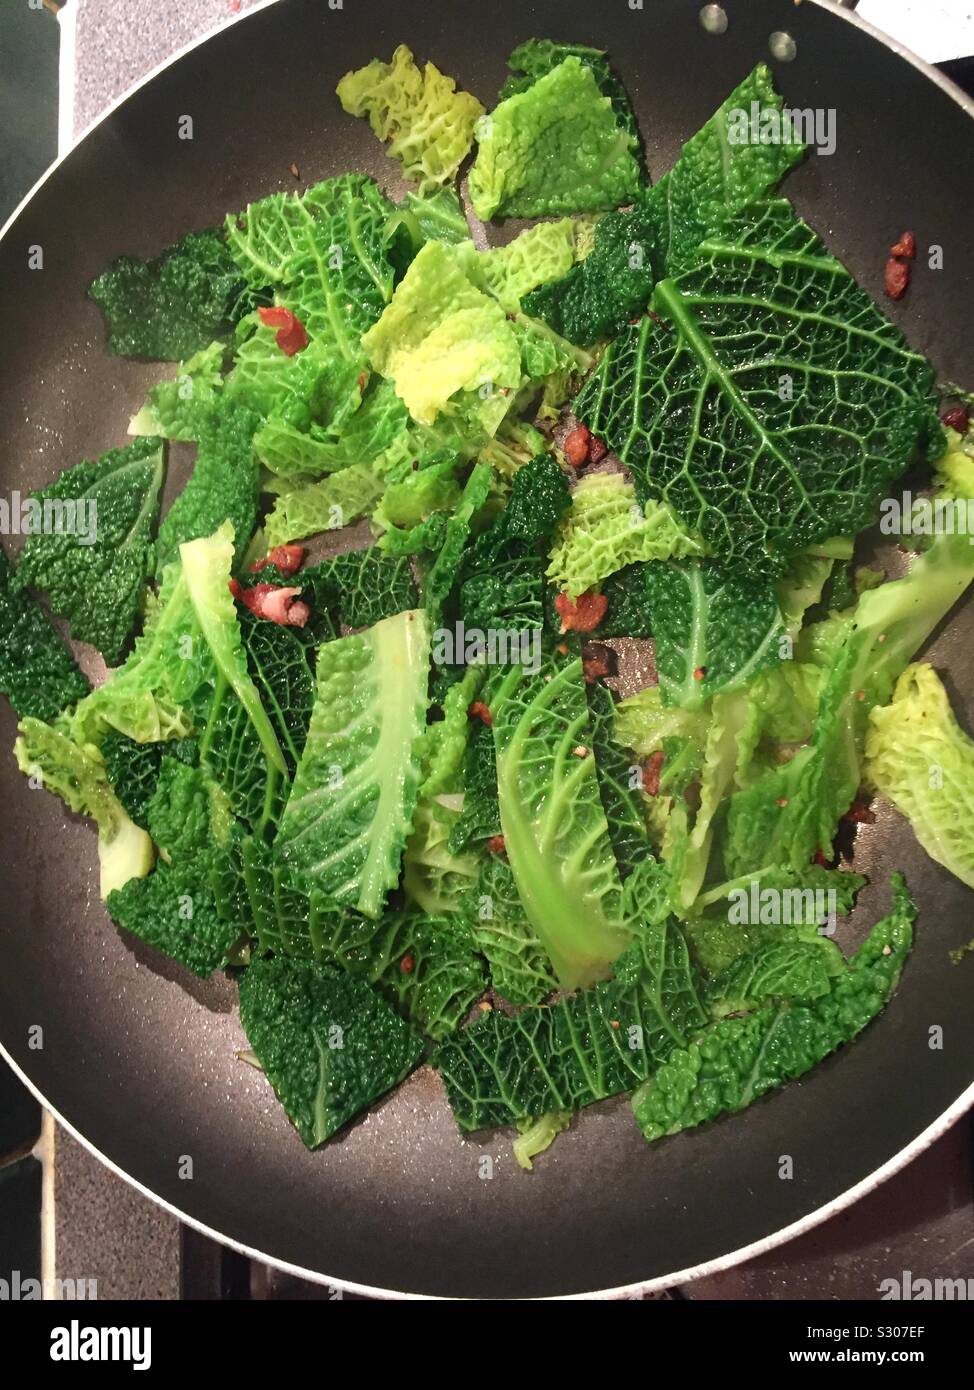 Healthy homemade food. Delicious Savoy cabbage with bacon no fat in the saucepan. Willesden Green, London, UK Stock Photo